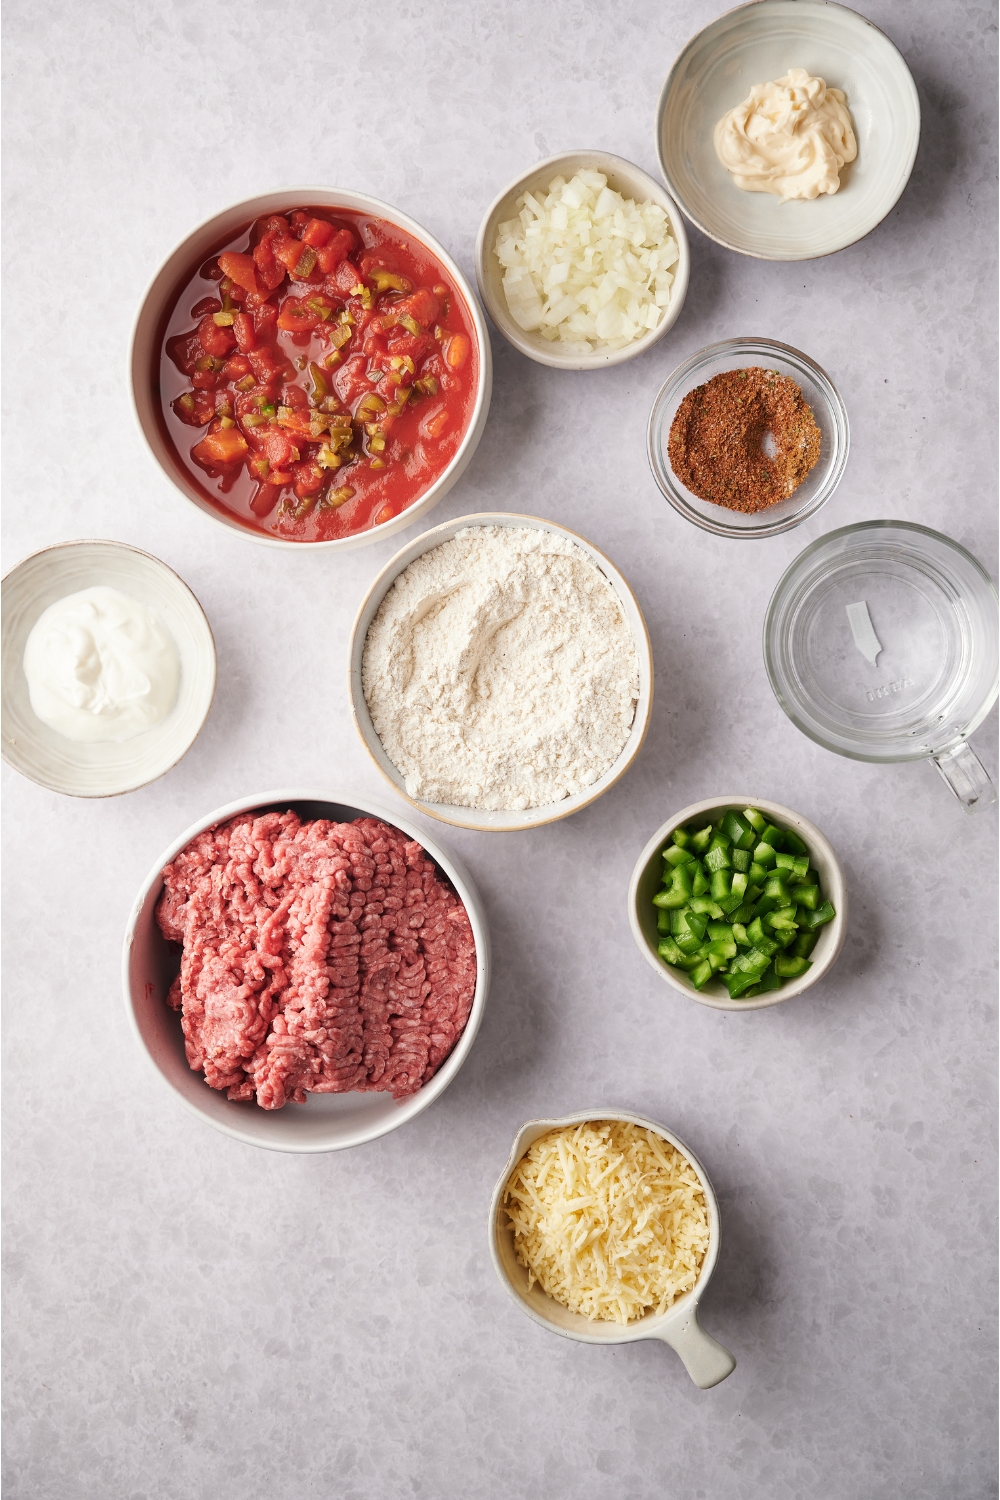 An assortment of ingredients including bowls of flour, sour cream, mayo, shredded cheese, salsa, raw ground beef, water, and seasoning.